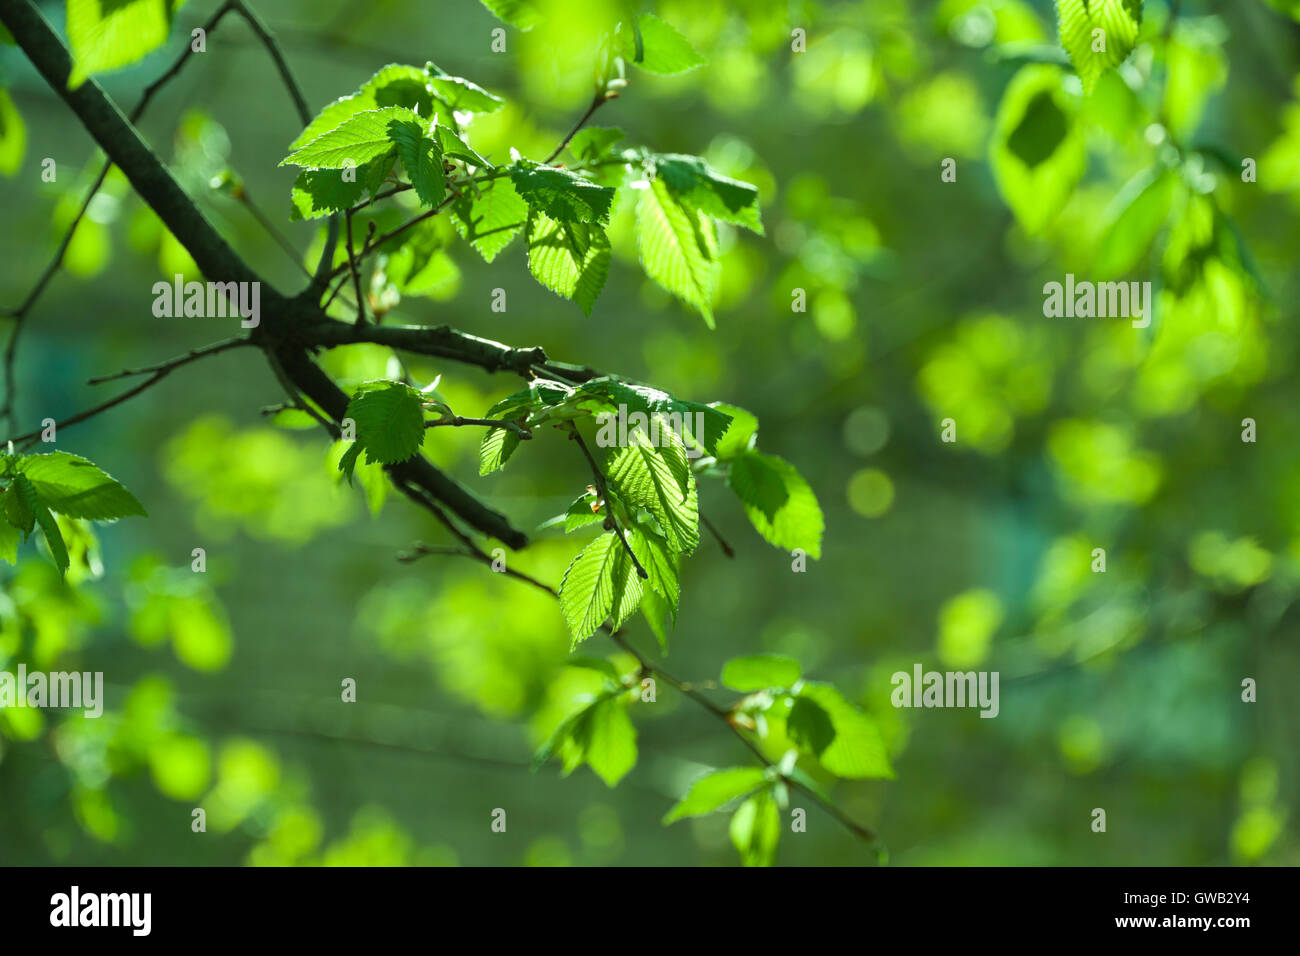 Natural seasonal spring eco background: pattern of young fresh foliage and branches against defocused green backdrop. Can be use Stock Photo